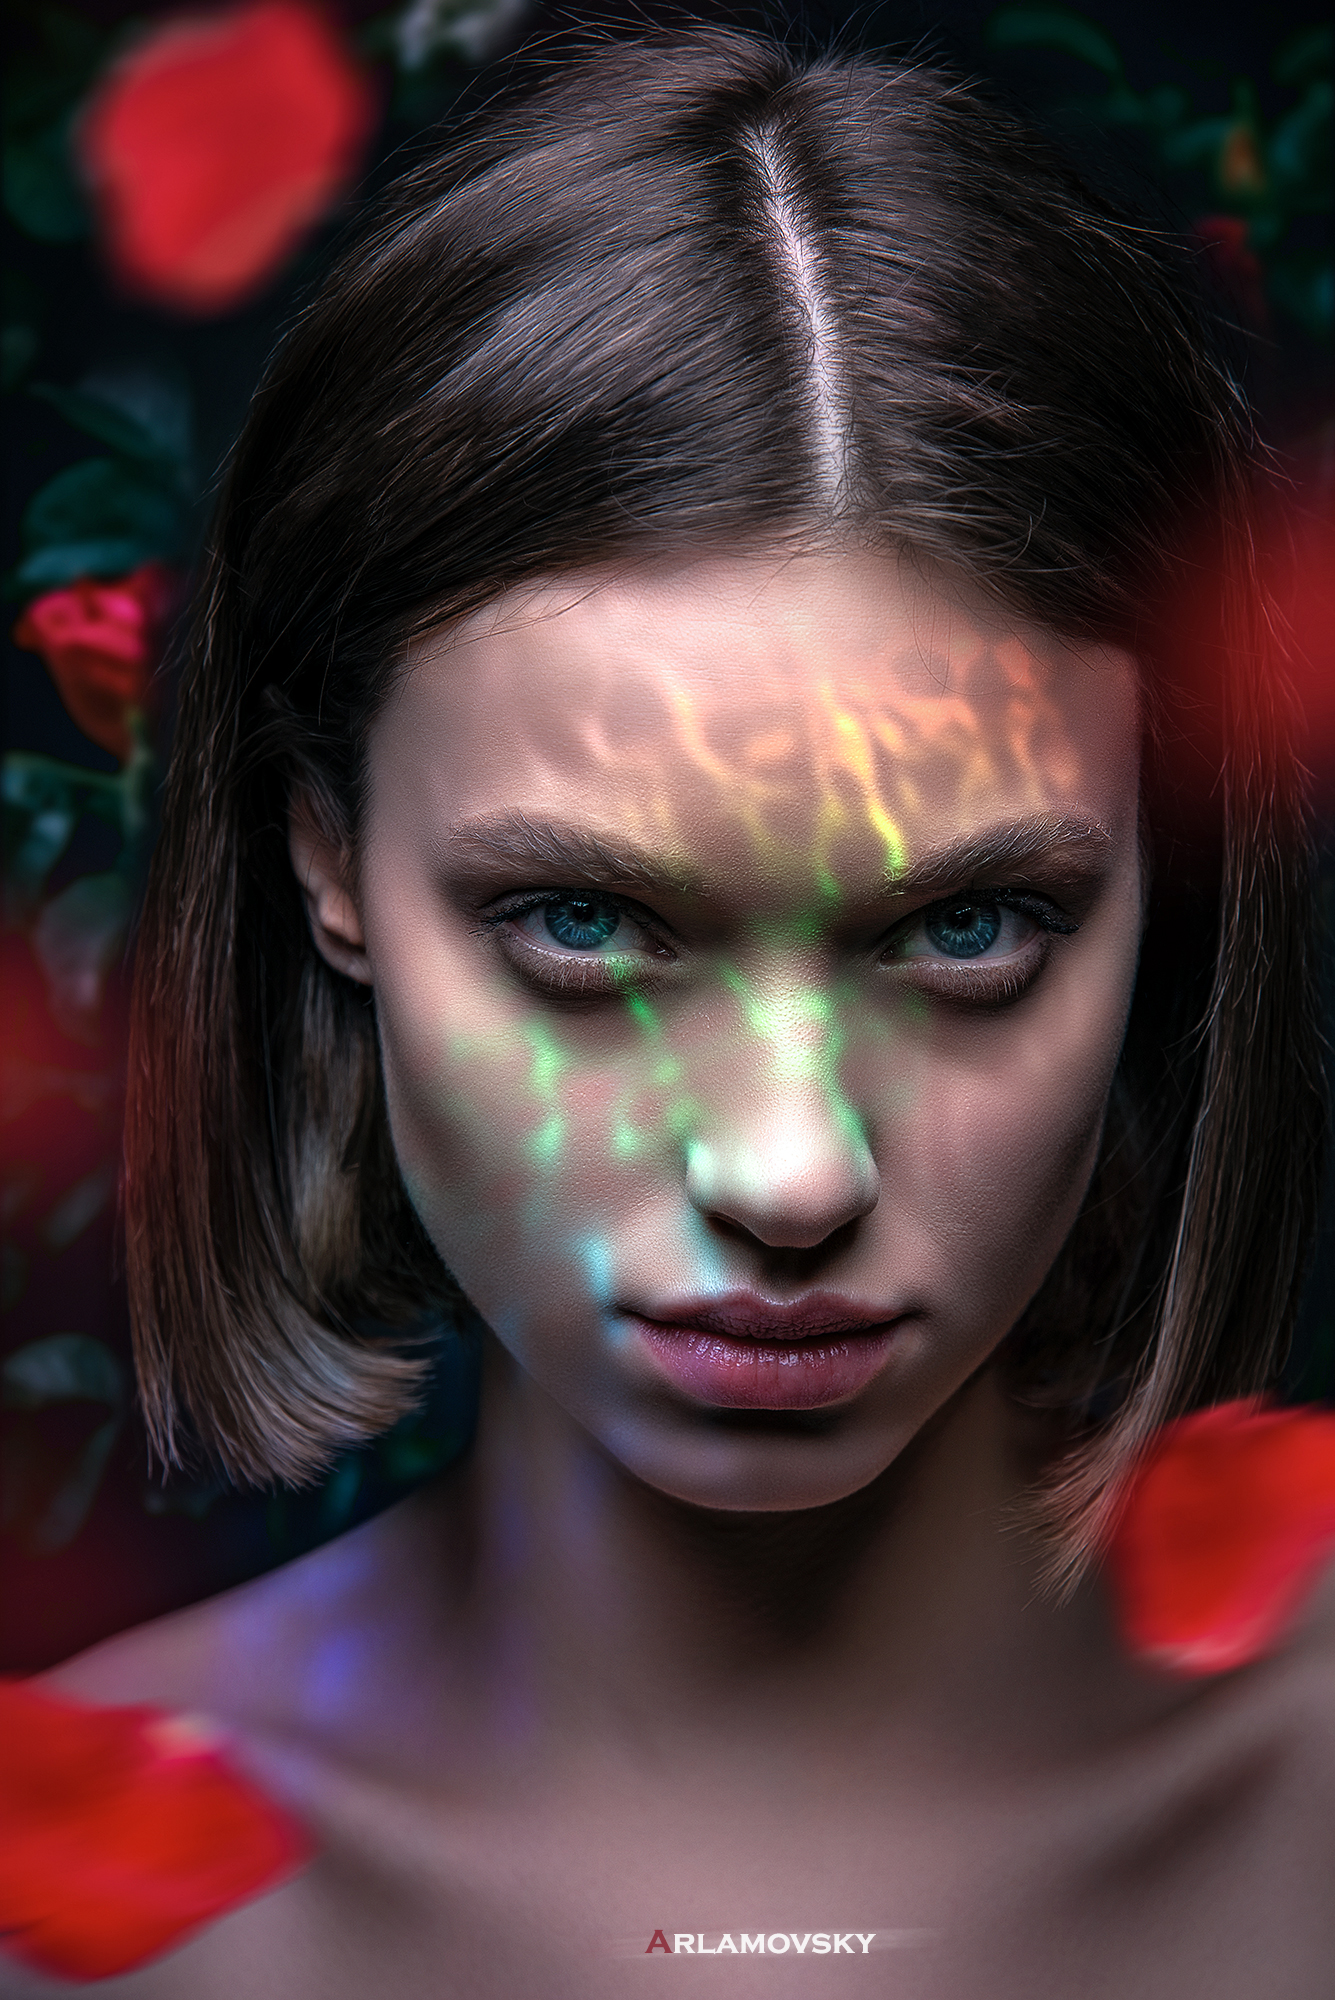 People 1335x2000 arlamovsky photoshopped photography portrait face light effects blue eyes women women outdoors brunette retouching petals forest portrait display watermarked closeup